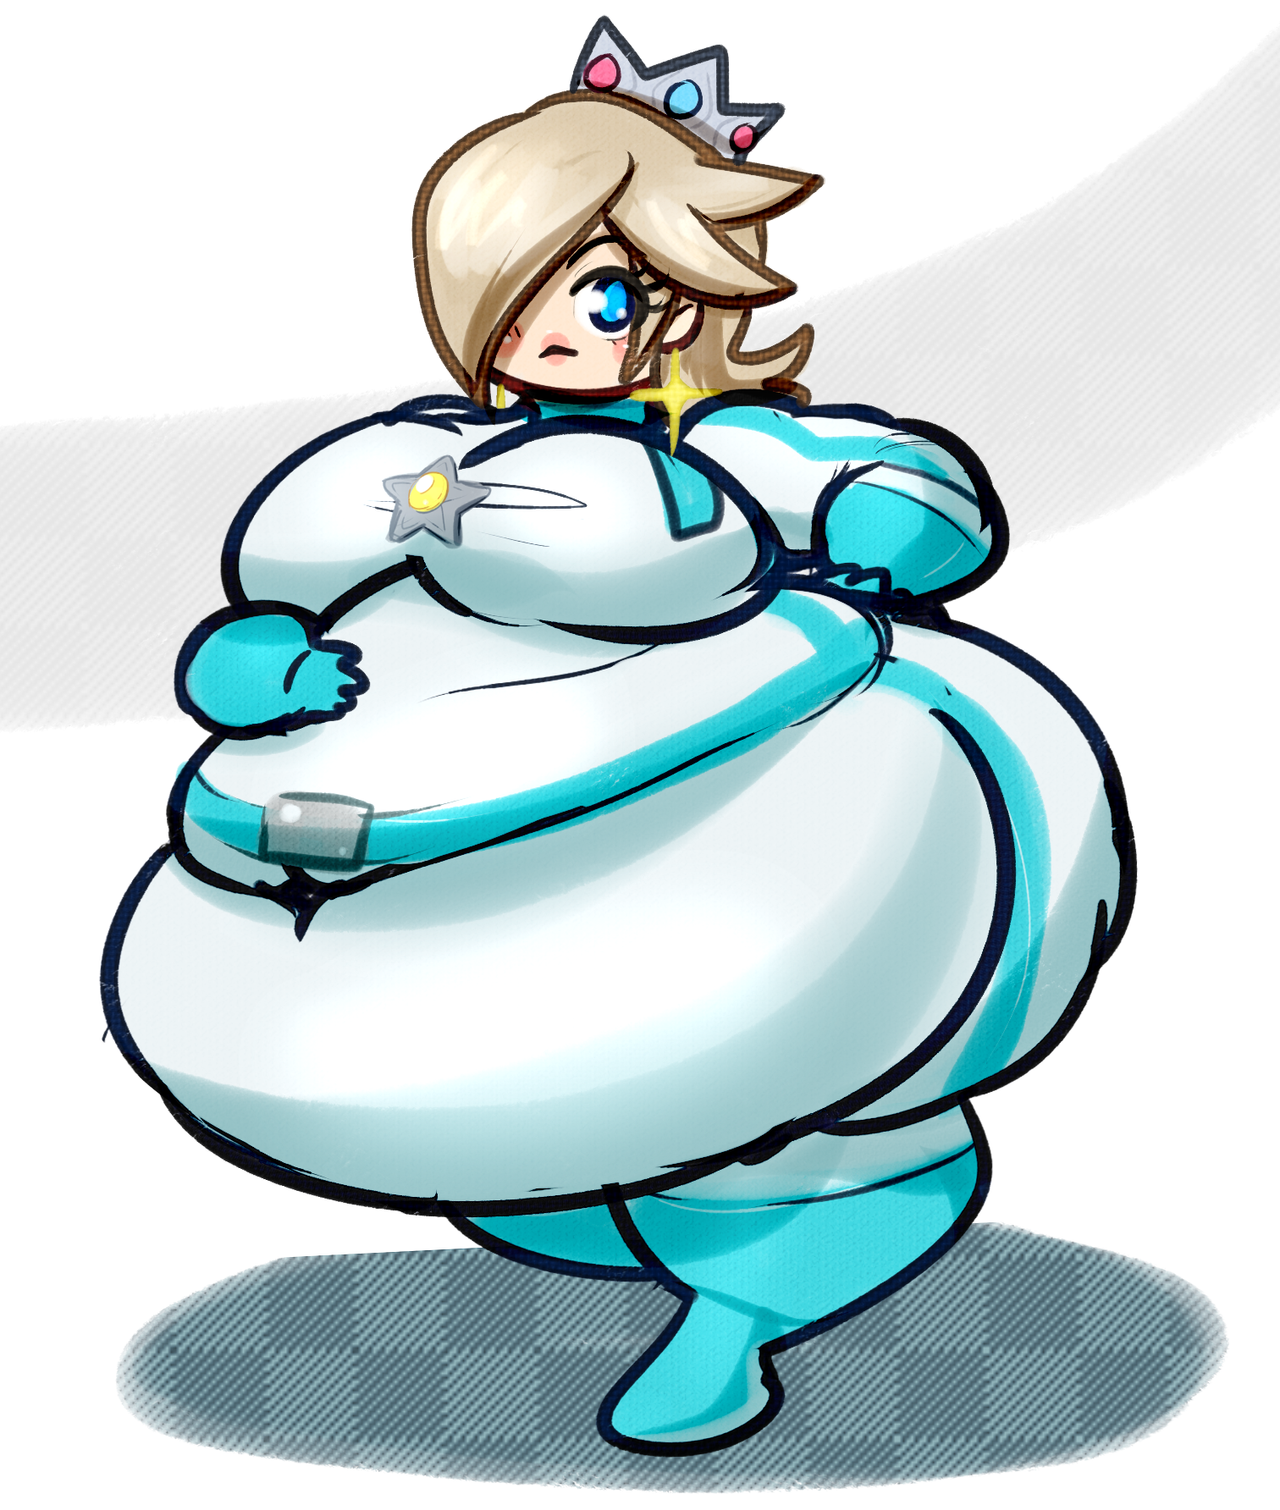 Rosalina Bulging Out Of Her Bike Suit By LLuxury On DeviantArt.